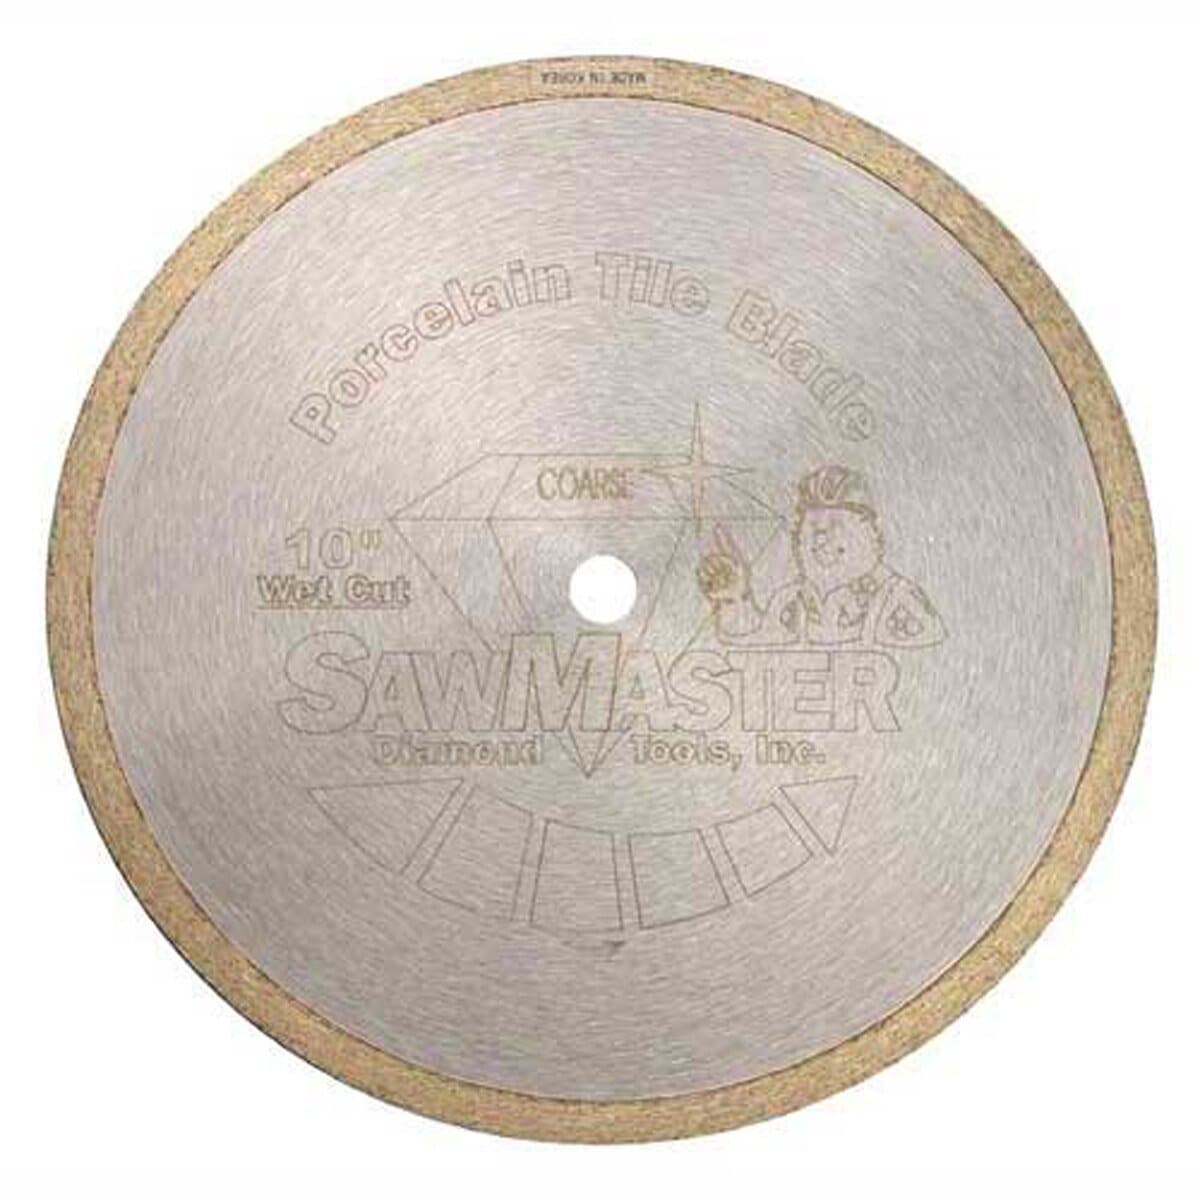 SawMaster Prolong Series - Wet - SawMaster